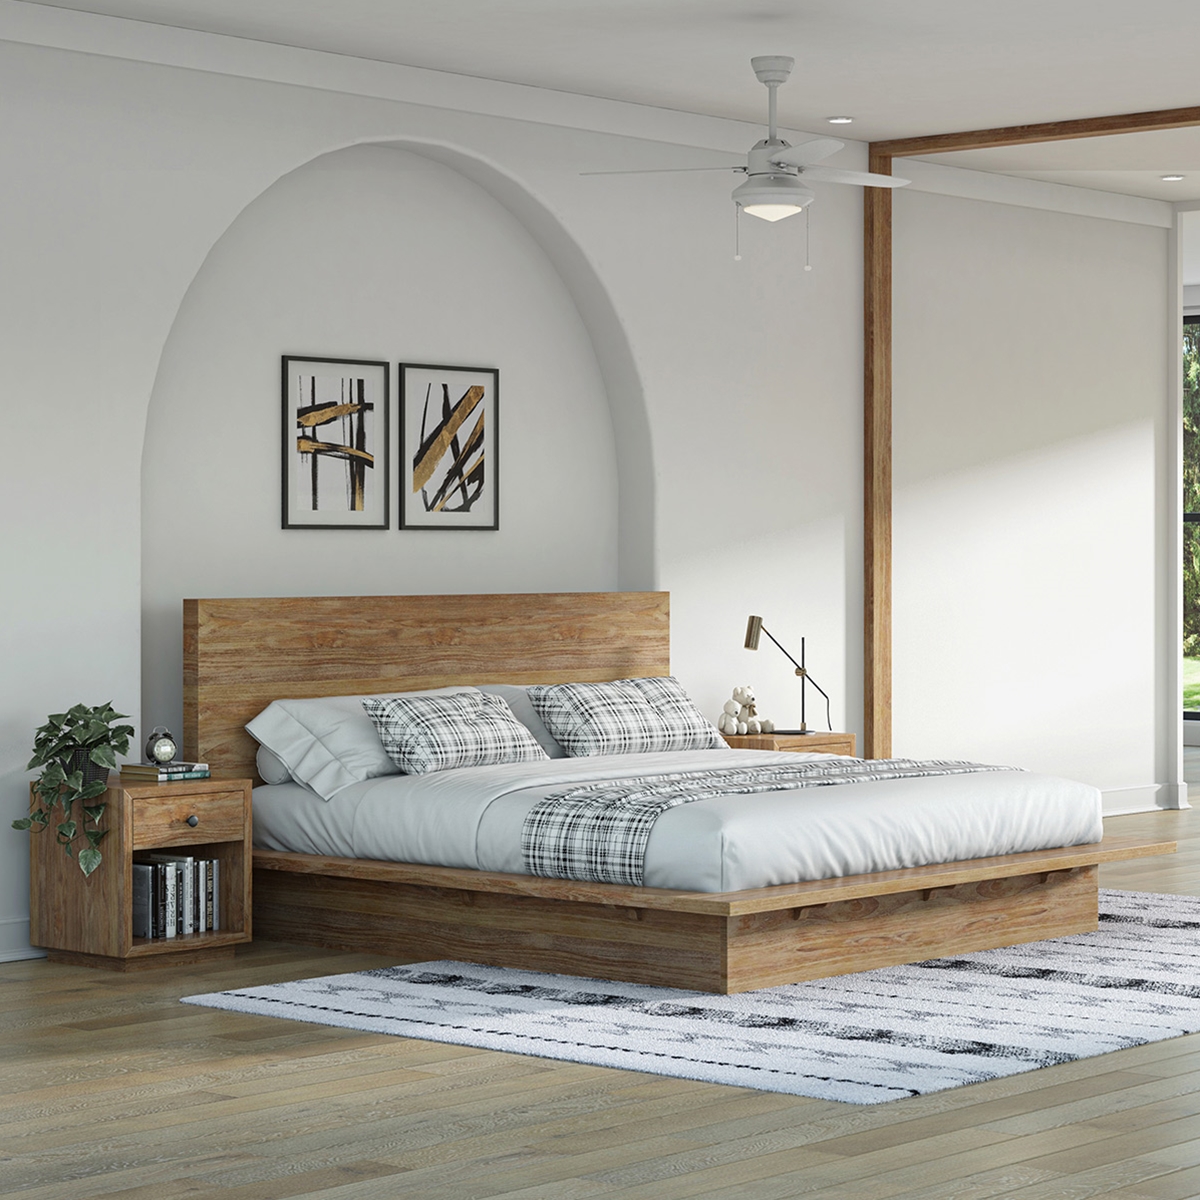 https://www.sierralivingconcepts.com/images/thumbs/0396095_britain-low-height-farmhouse-teak-wood-platform-bed-frame-with-headboard.jpeg